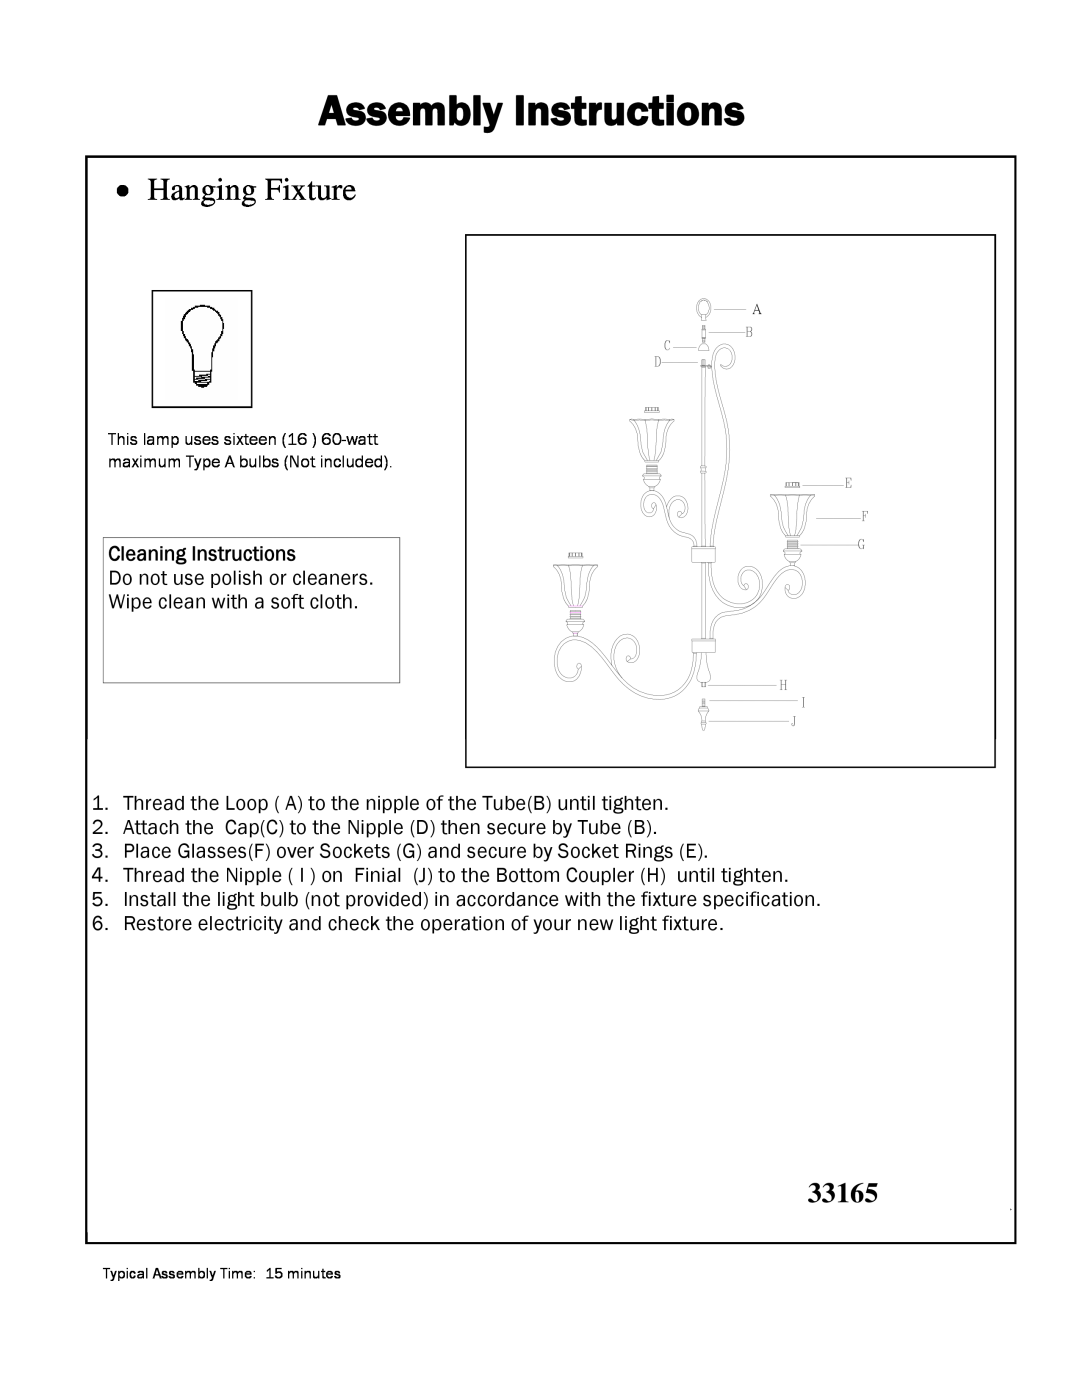 Triarch 33165 manual Assembly Instructions, Hanging Fixture, Cleaning Instructions 